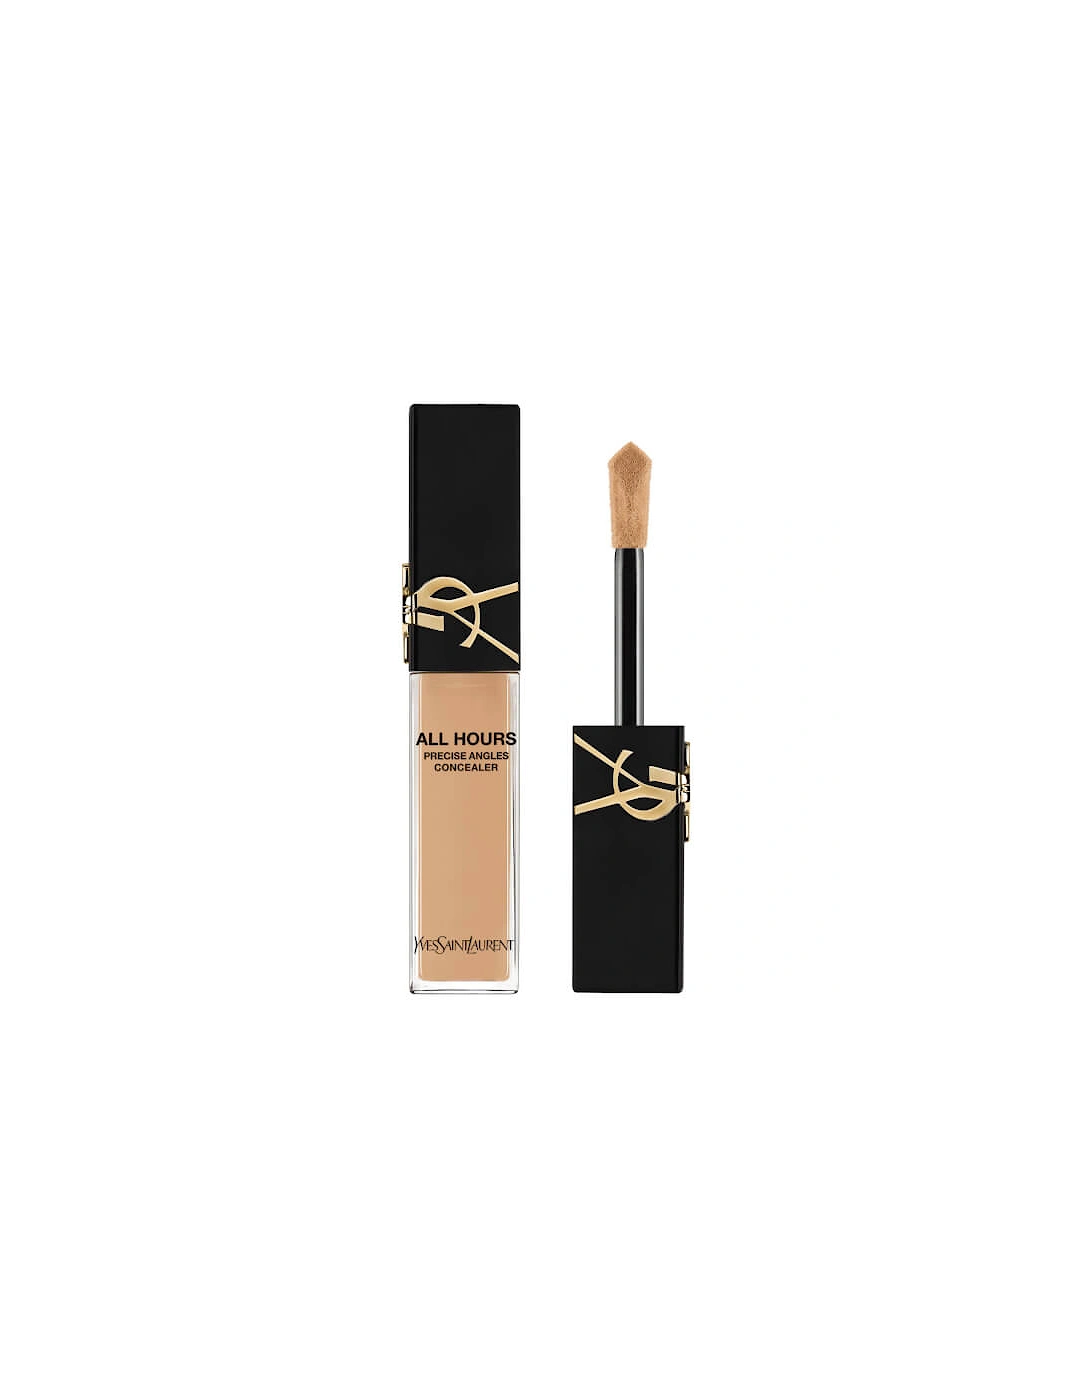 Yves Saint Laurent All Hours Concealer - LC5, 2 of 1